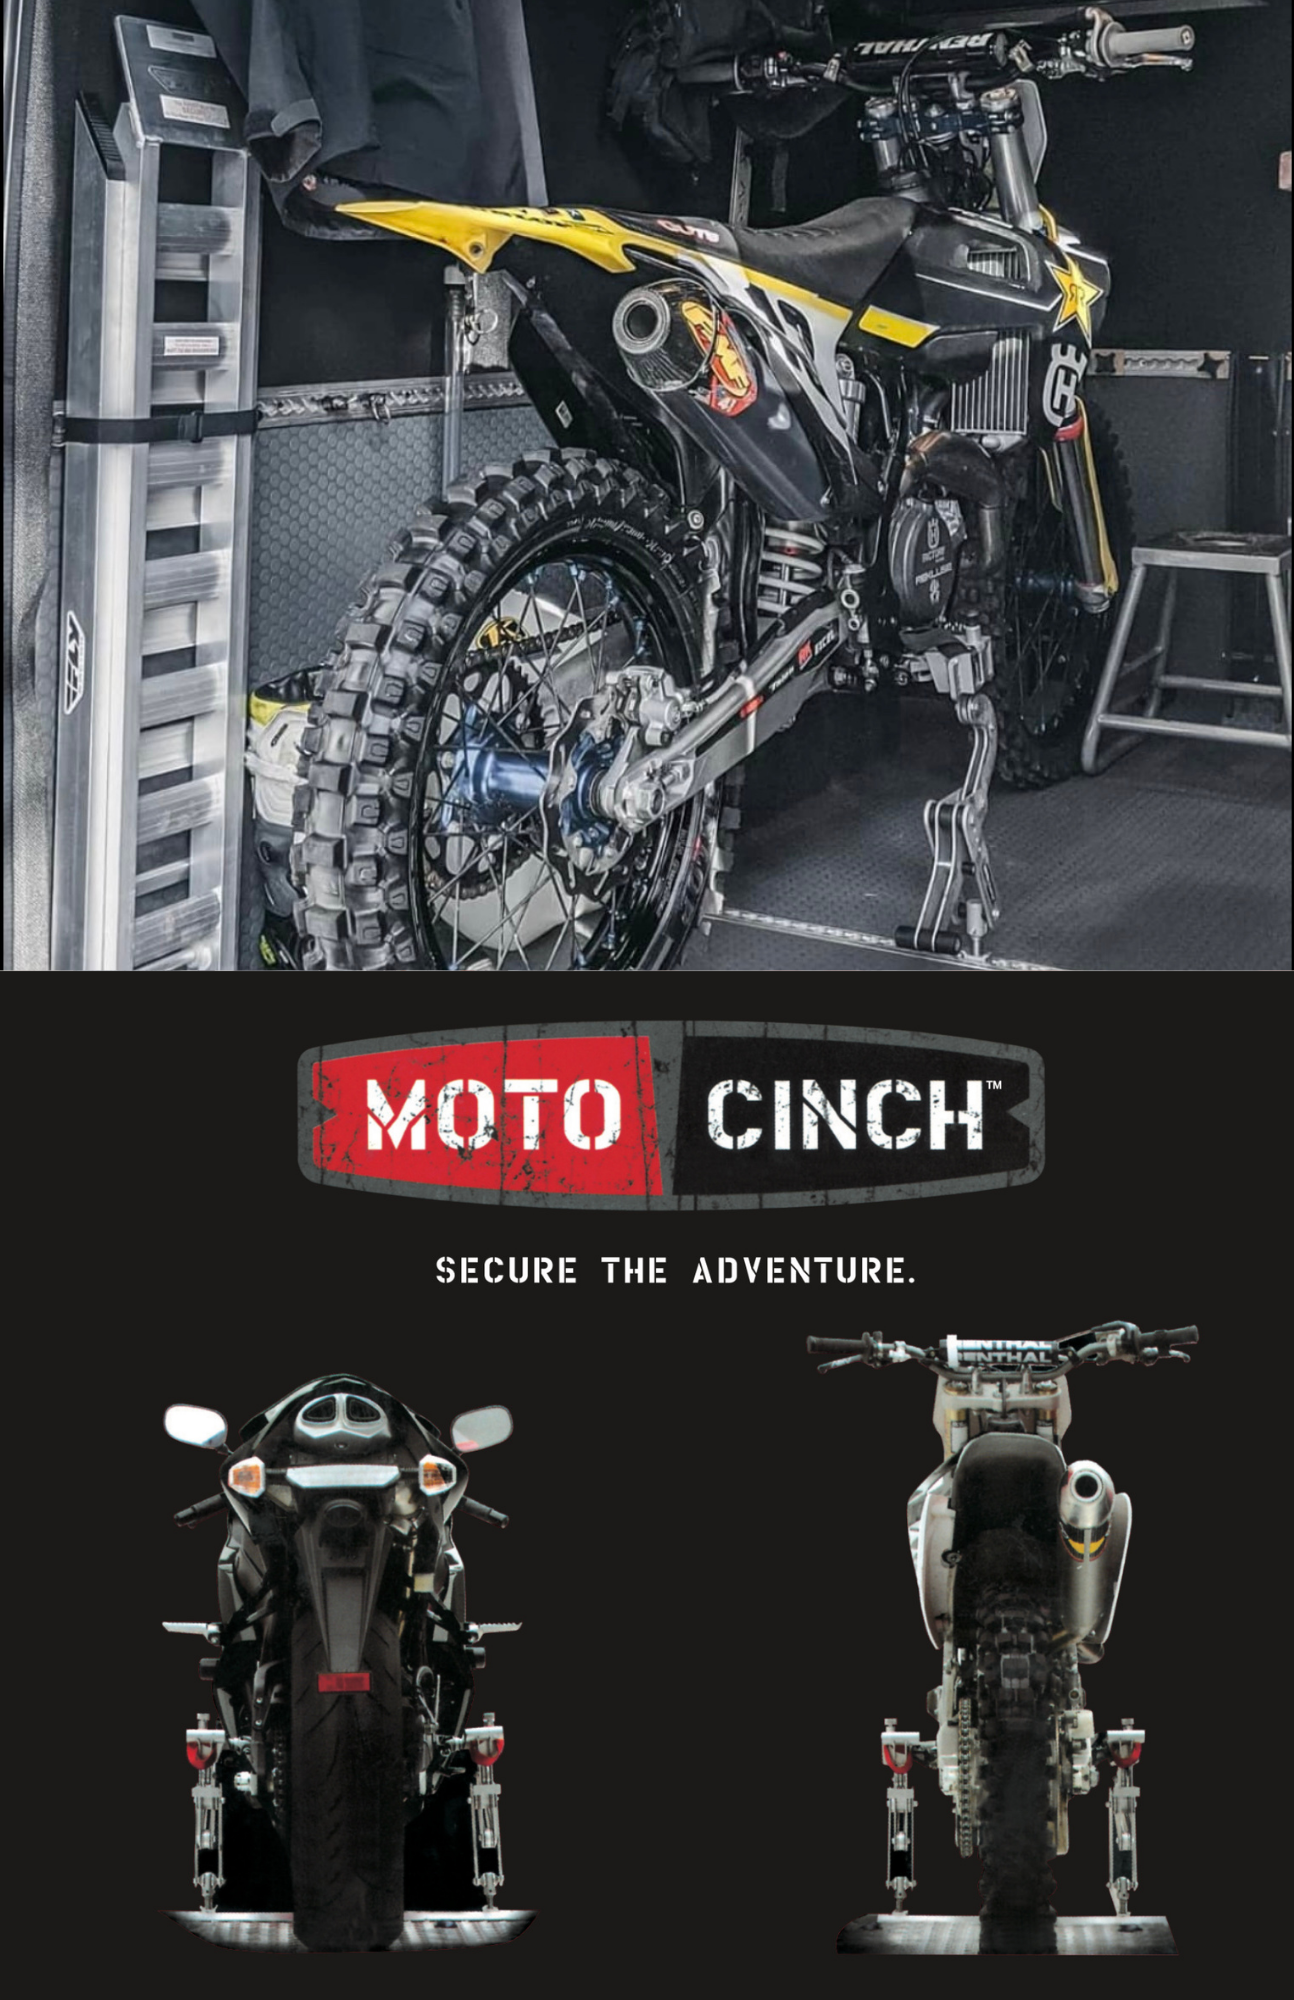 Moto Cinch foot peg tie down system for dirt, street, enduro, adventure and just about any bike made!